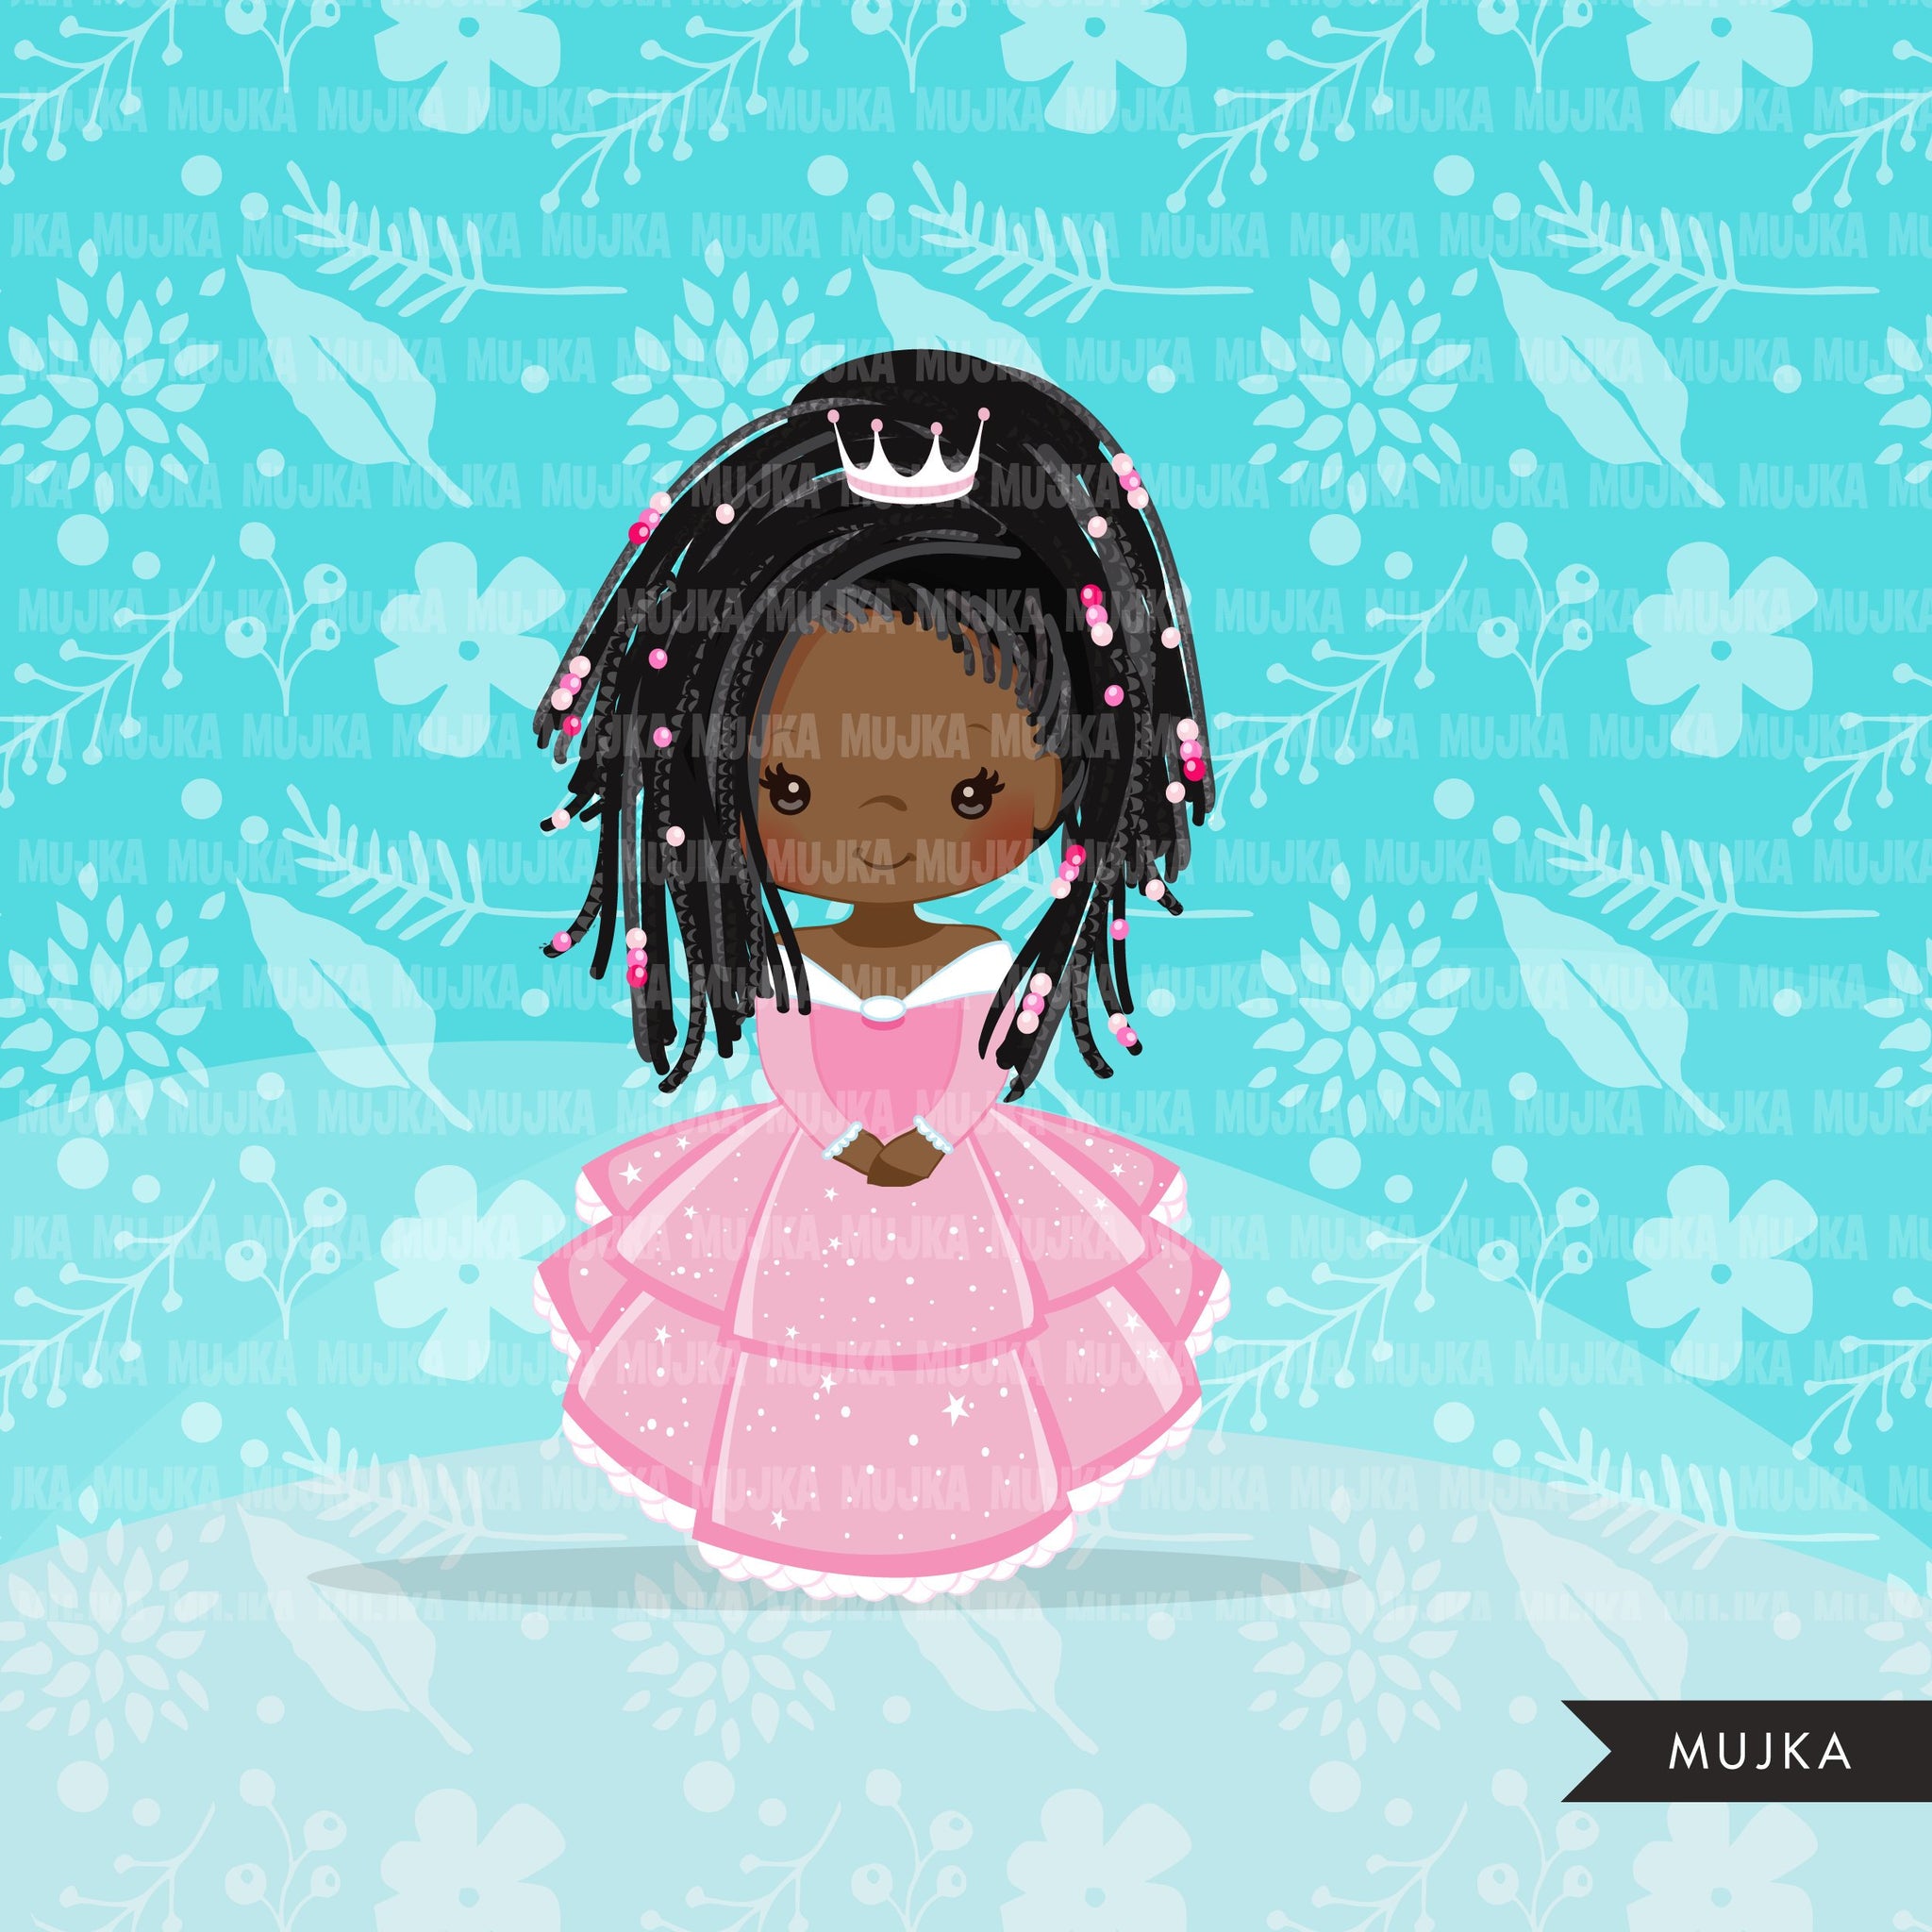 Black Princess clipart, fairy tale graphics, girls story book, pink princess dress, commercial use clip art